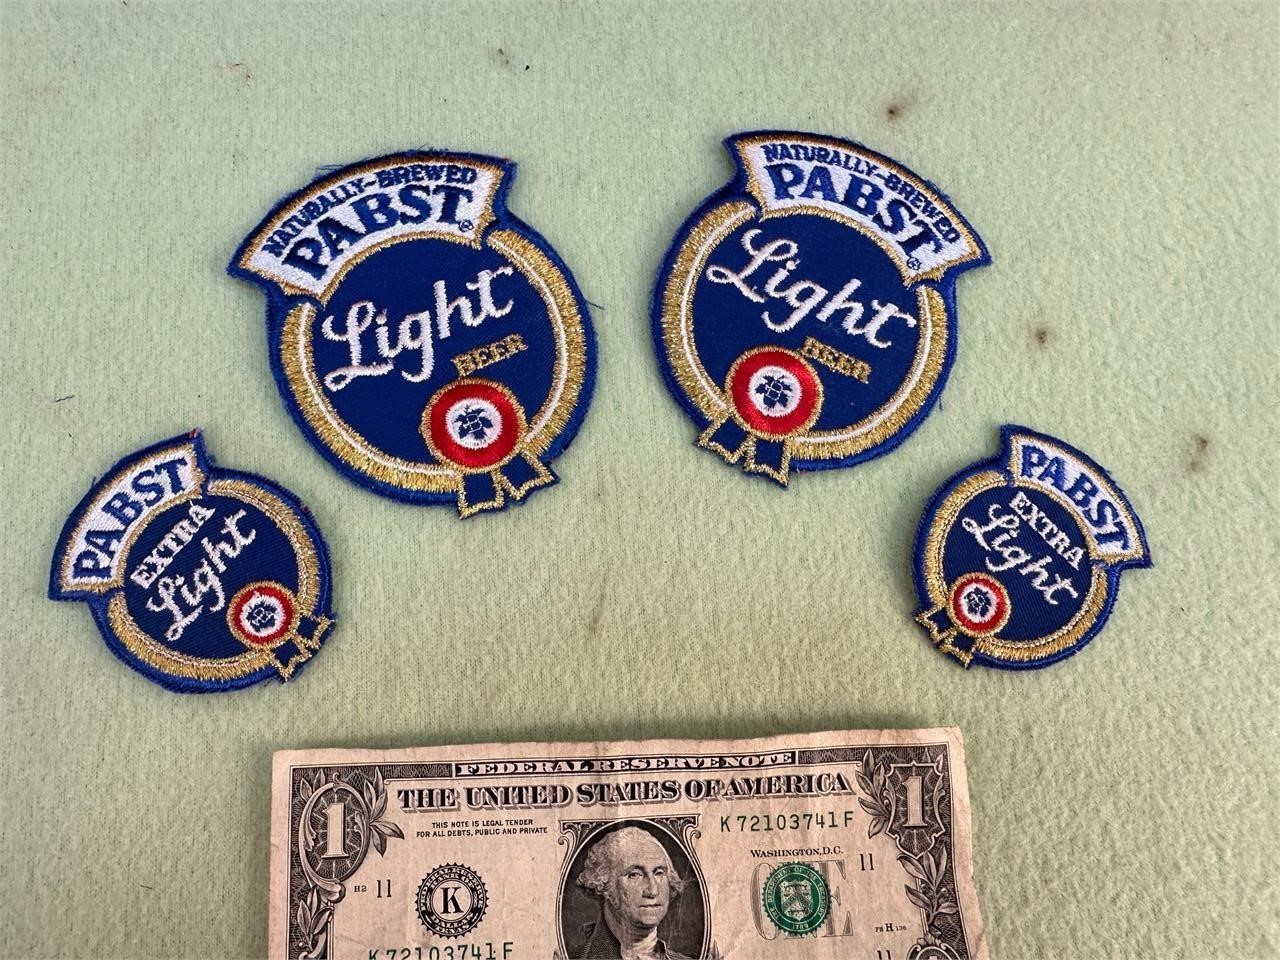 4 PATCHES PABST BLUE RIBBON LIGHT